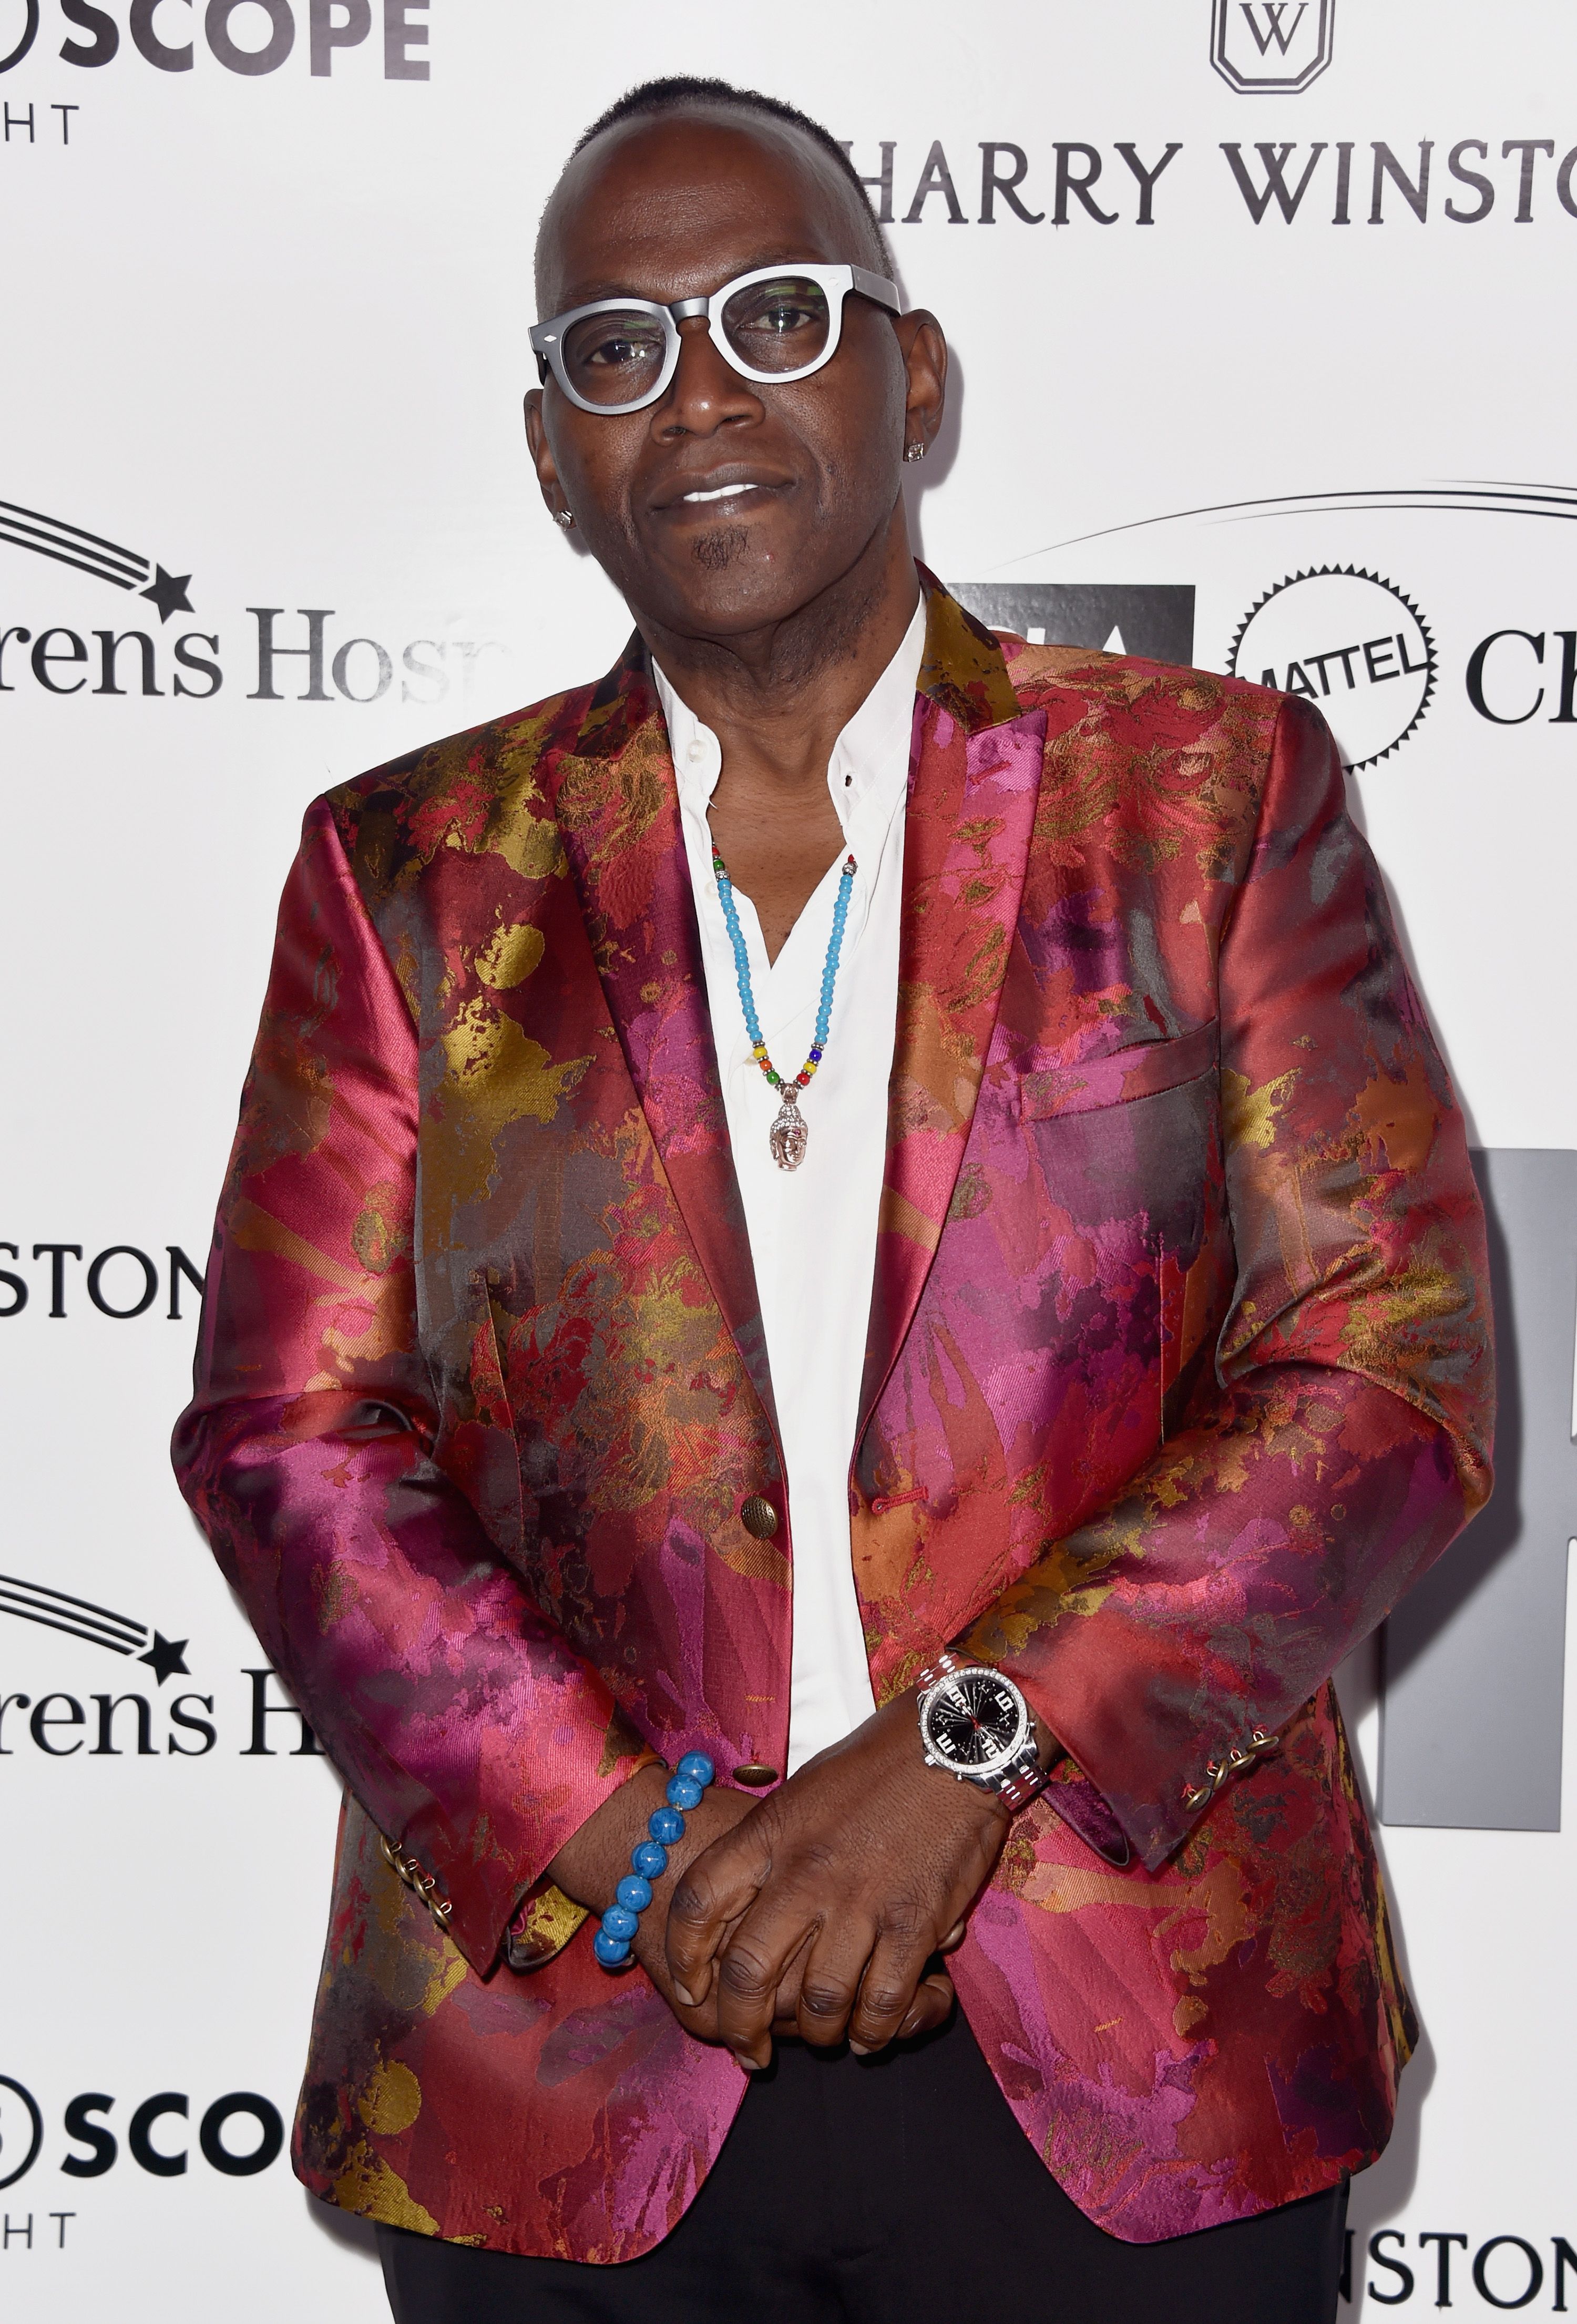 Randy Jackson at the UCLA Mattel Children's Hospital's Kaleidoscope 5 at 3LABS on May 6, 2017 in Culver City, California. | Photo: Getty Images